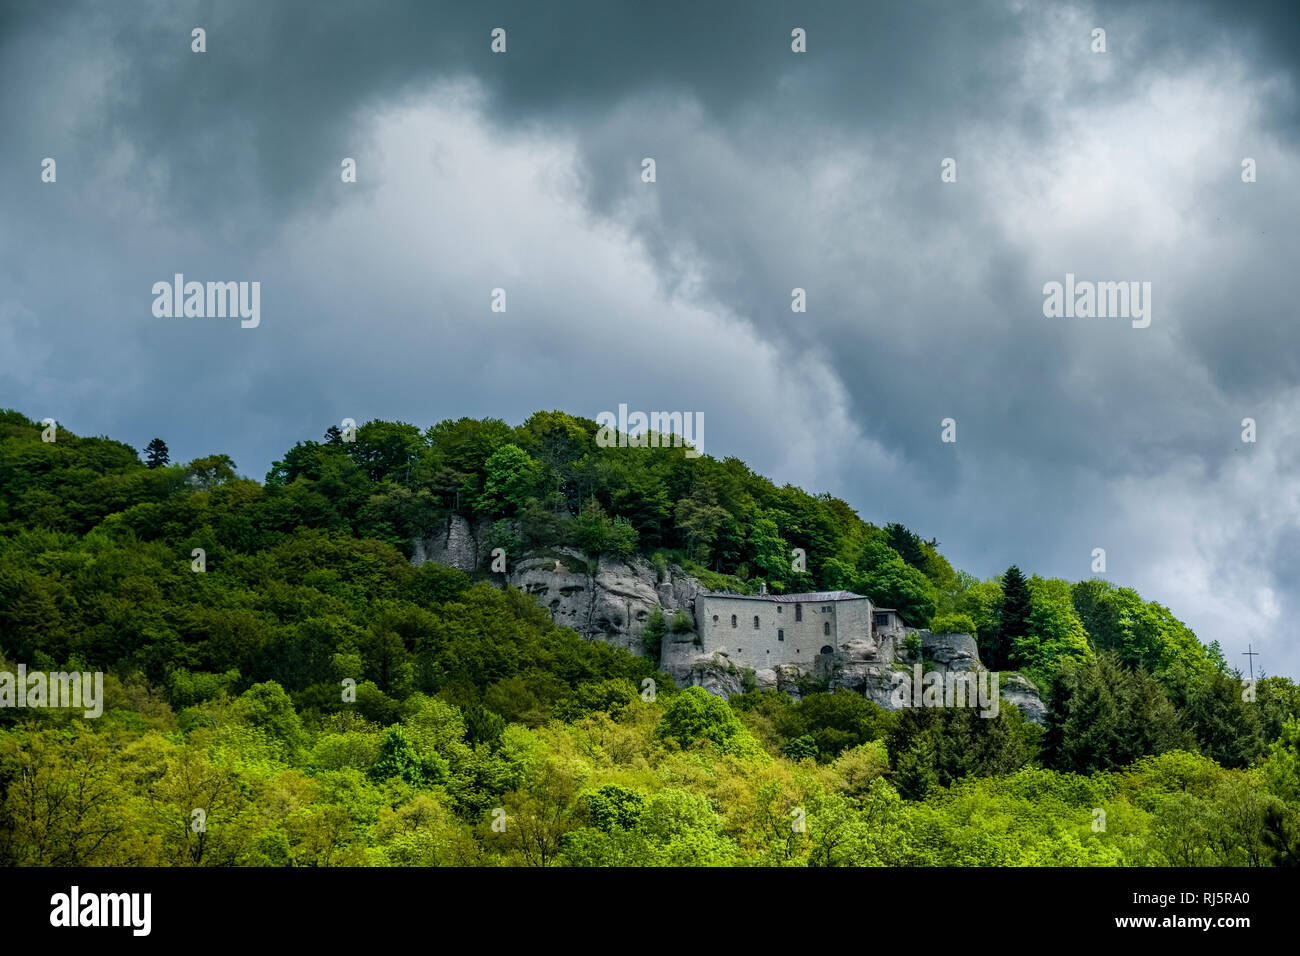 The monastery Santuario della Verna is located on a forested hill Stock Photo